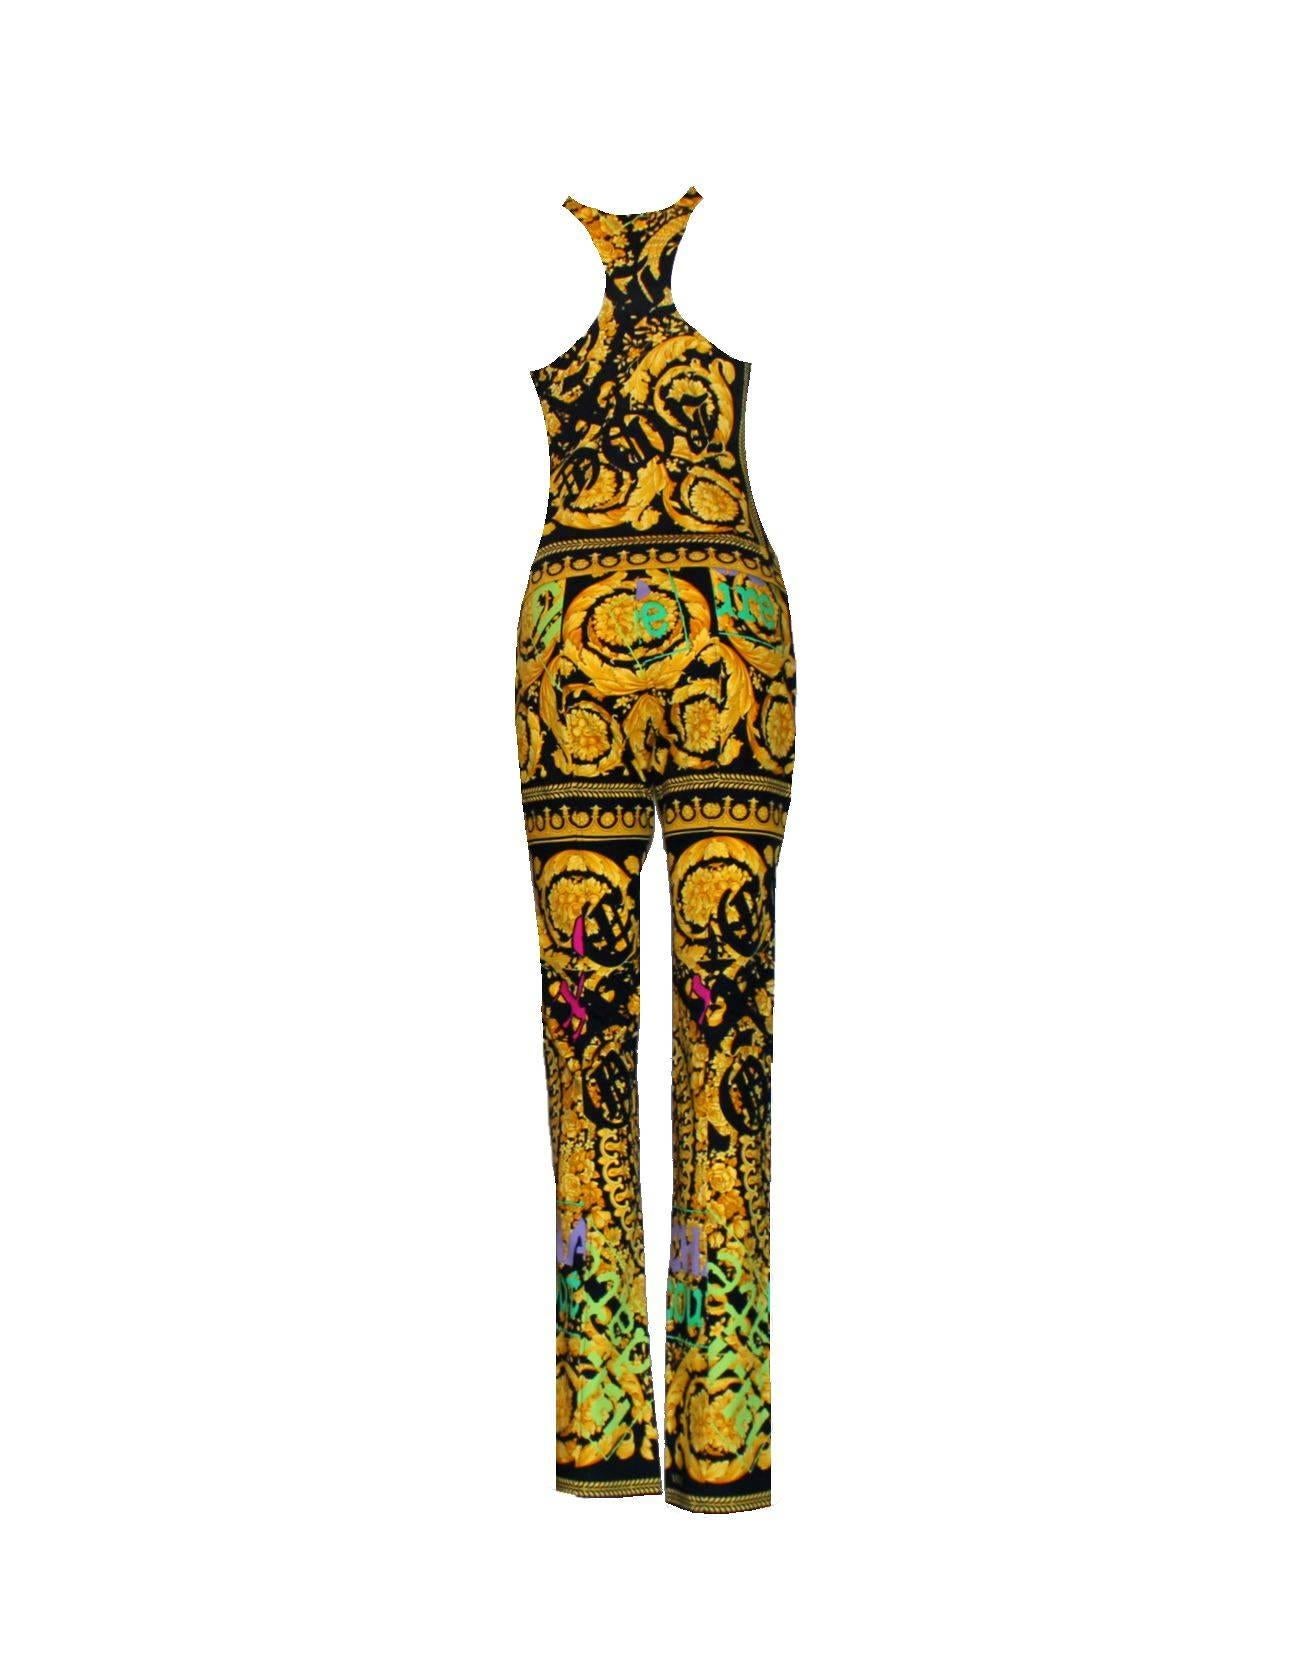 A colorful ensemble by Versace
Consisting of two pieces: Top and pants
Signature print with the famous Versace medusa head
Full length pants
Top made of soft fabric with racer back
Made in Italy